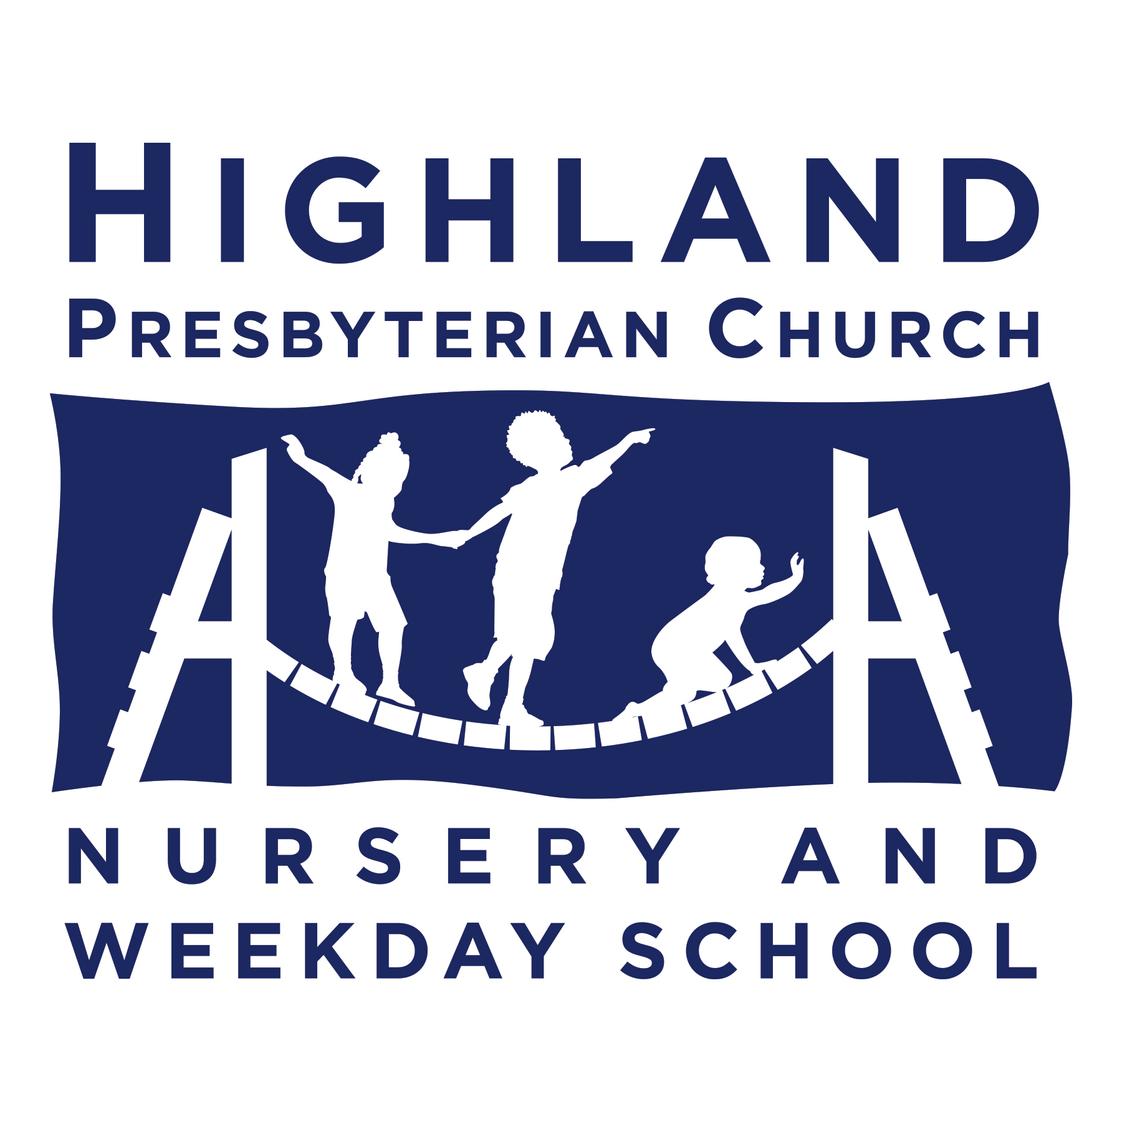 Highland Presbyterian Nursery and Weekday School Photo #1 - Highland Presbyterian Church Nursery & Weekday School: A place where children think reflectively, interact respectfully and discover the world around them with wonder and joy.